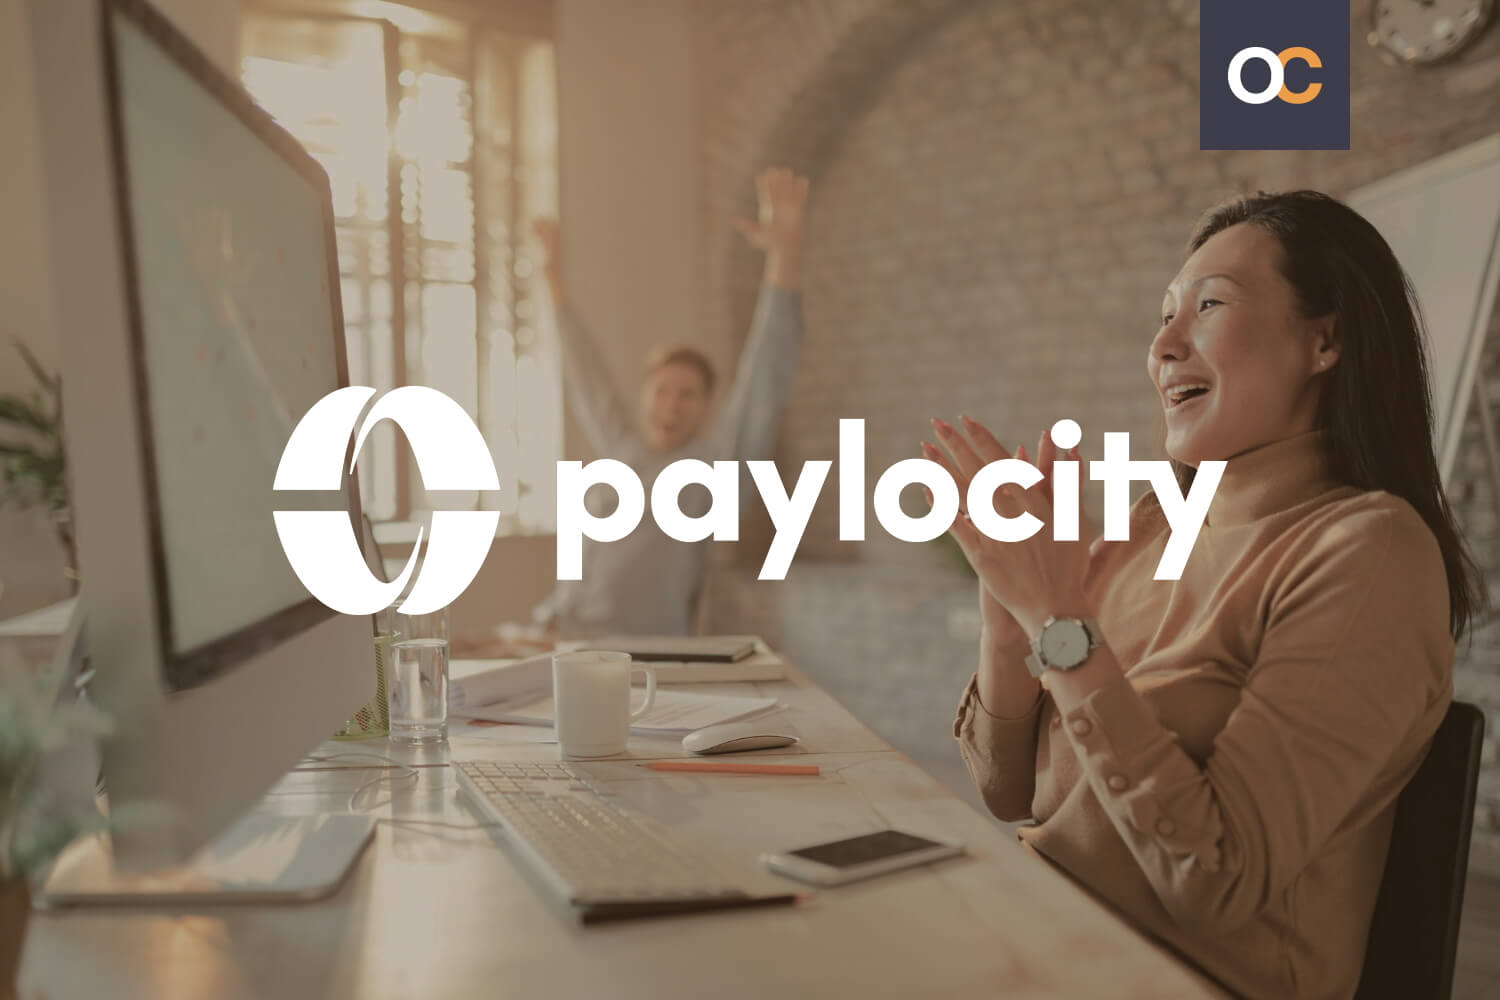 OrgChart now integrates with Paylocity